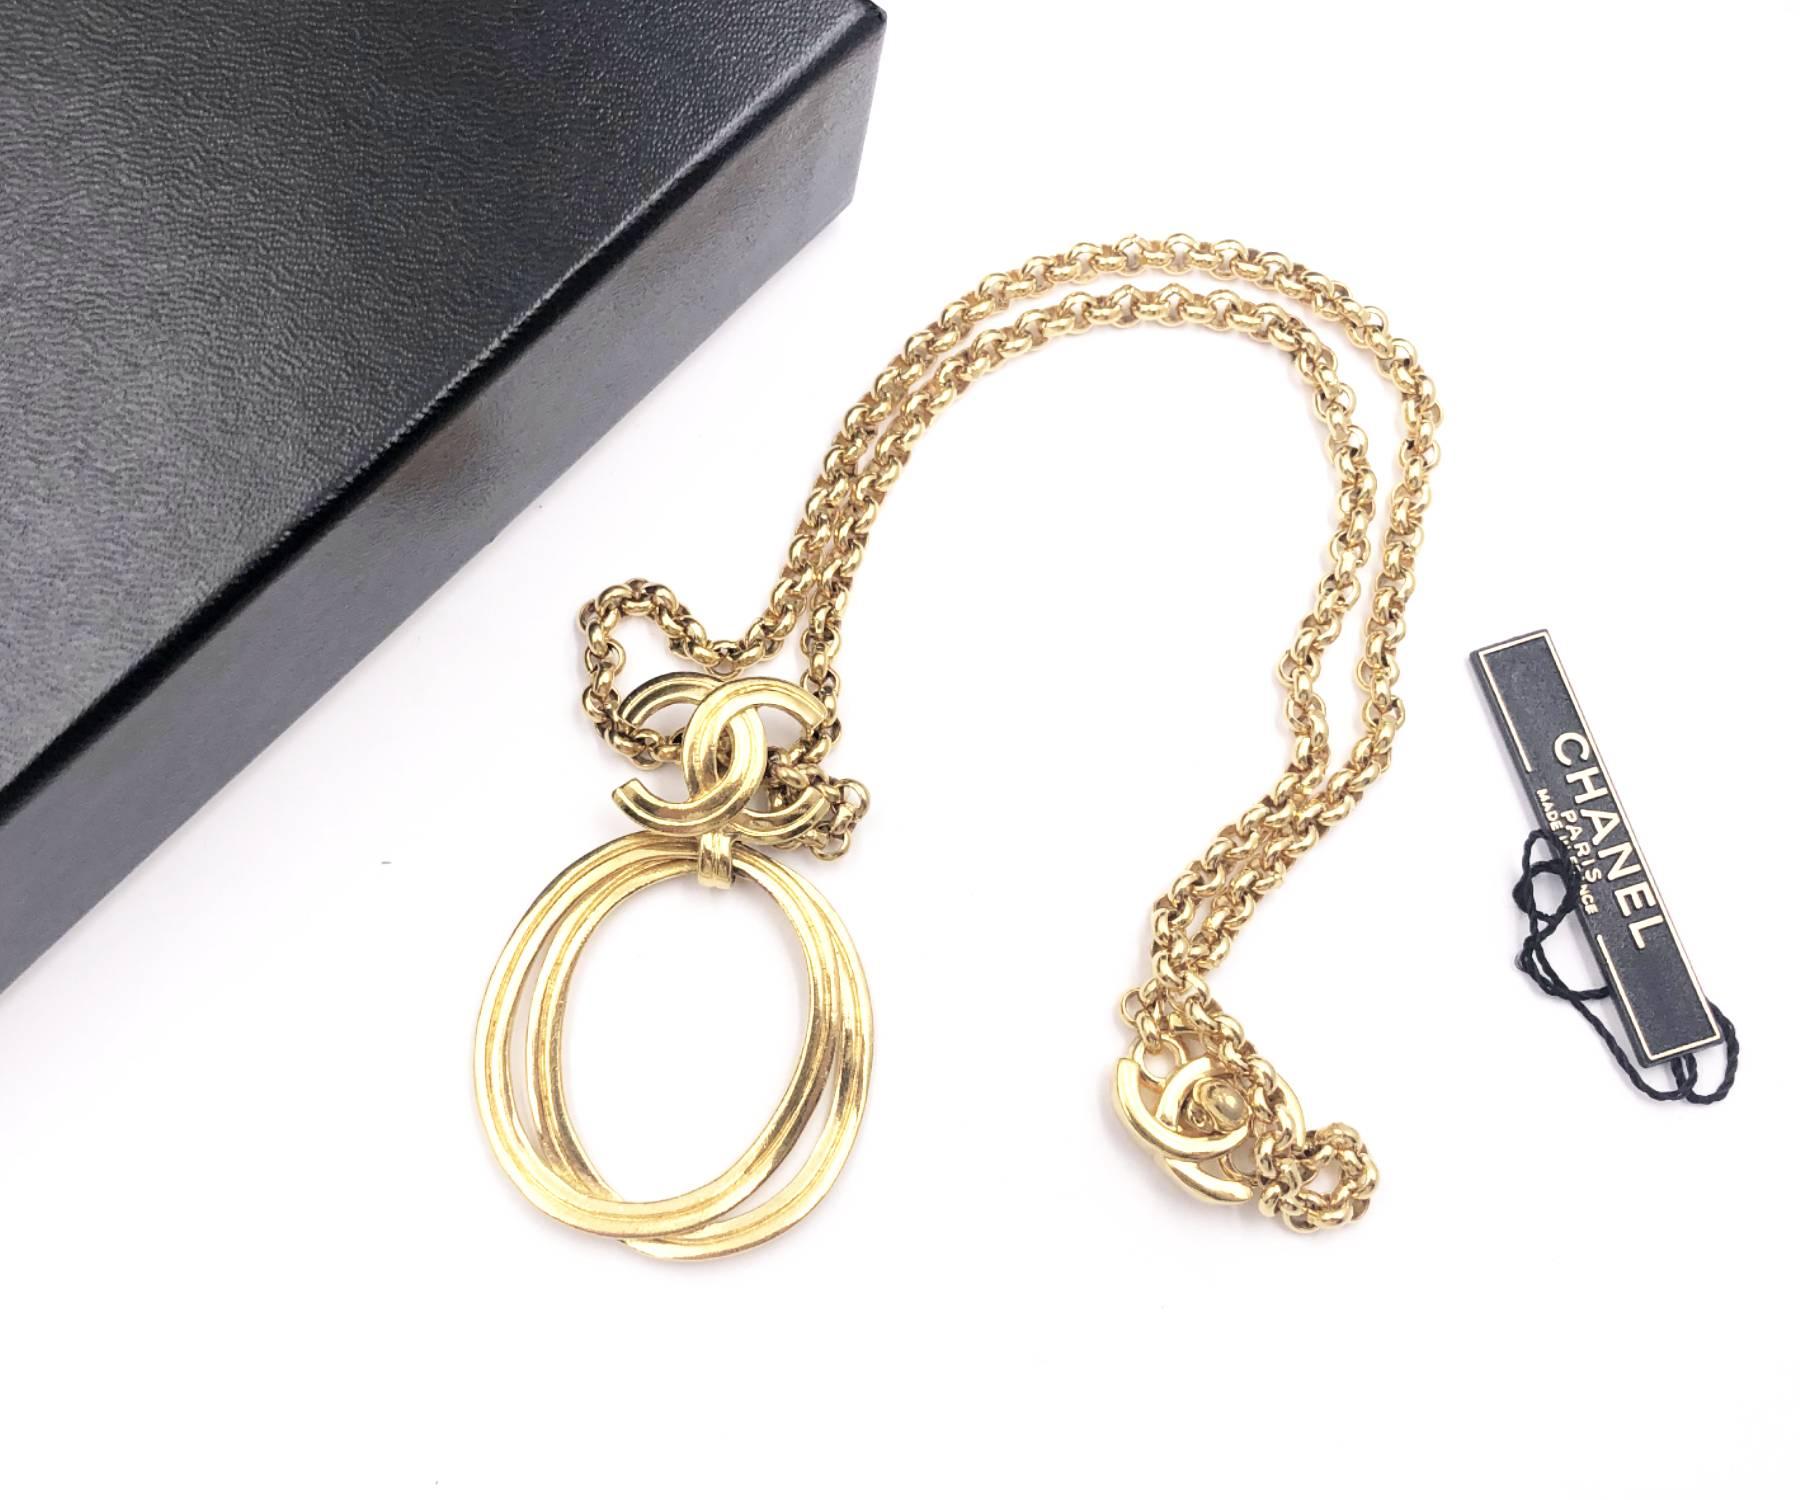 Chanel Vintage Rare Gold Plated CC Ring Turnlock Necklace

*Marked 96
*Made in France
*Comes with original box and tag

-The pendant is approximately 2.25″ x 1.9″
-The necklace is approximately 23″.
-This is one of a kind, very rare and great for